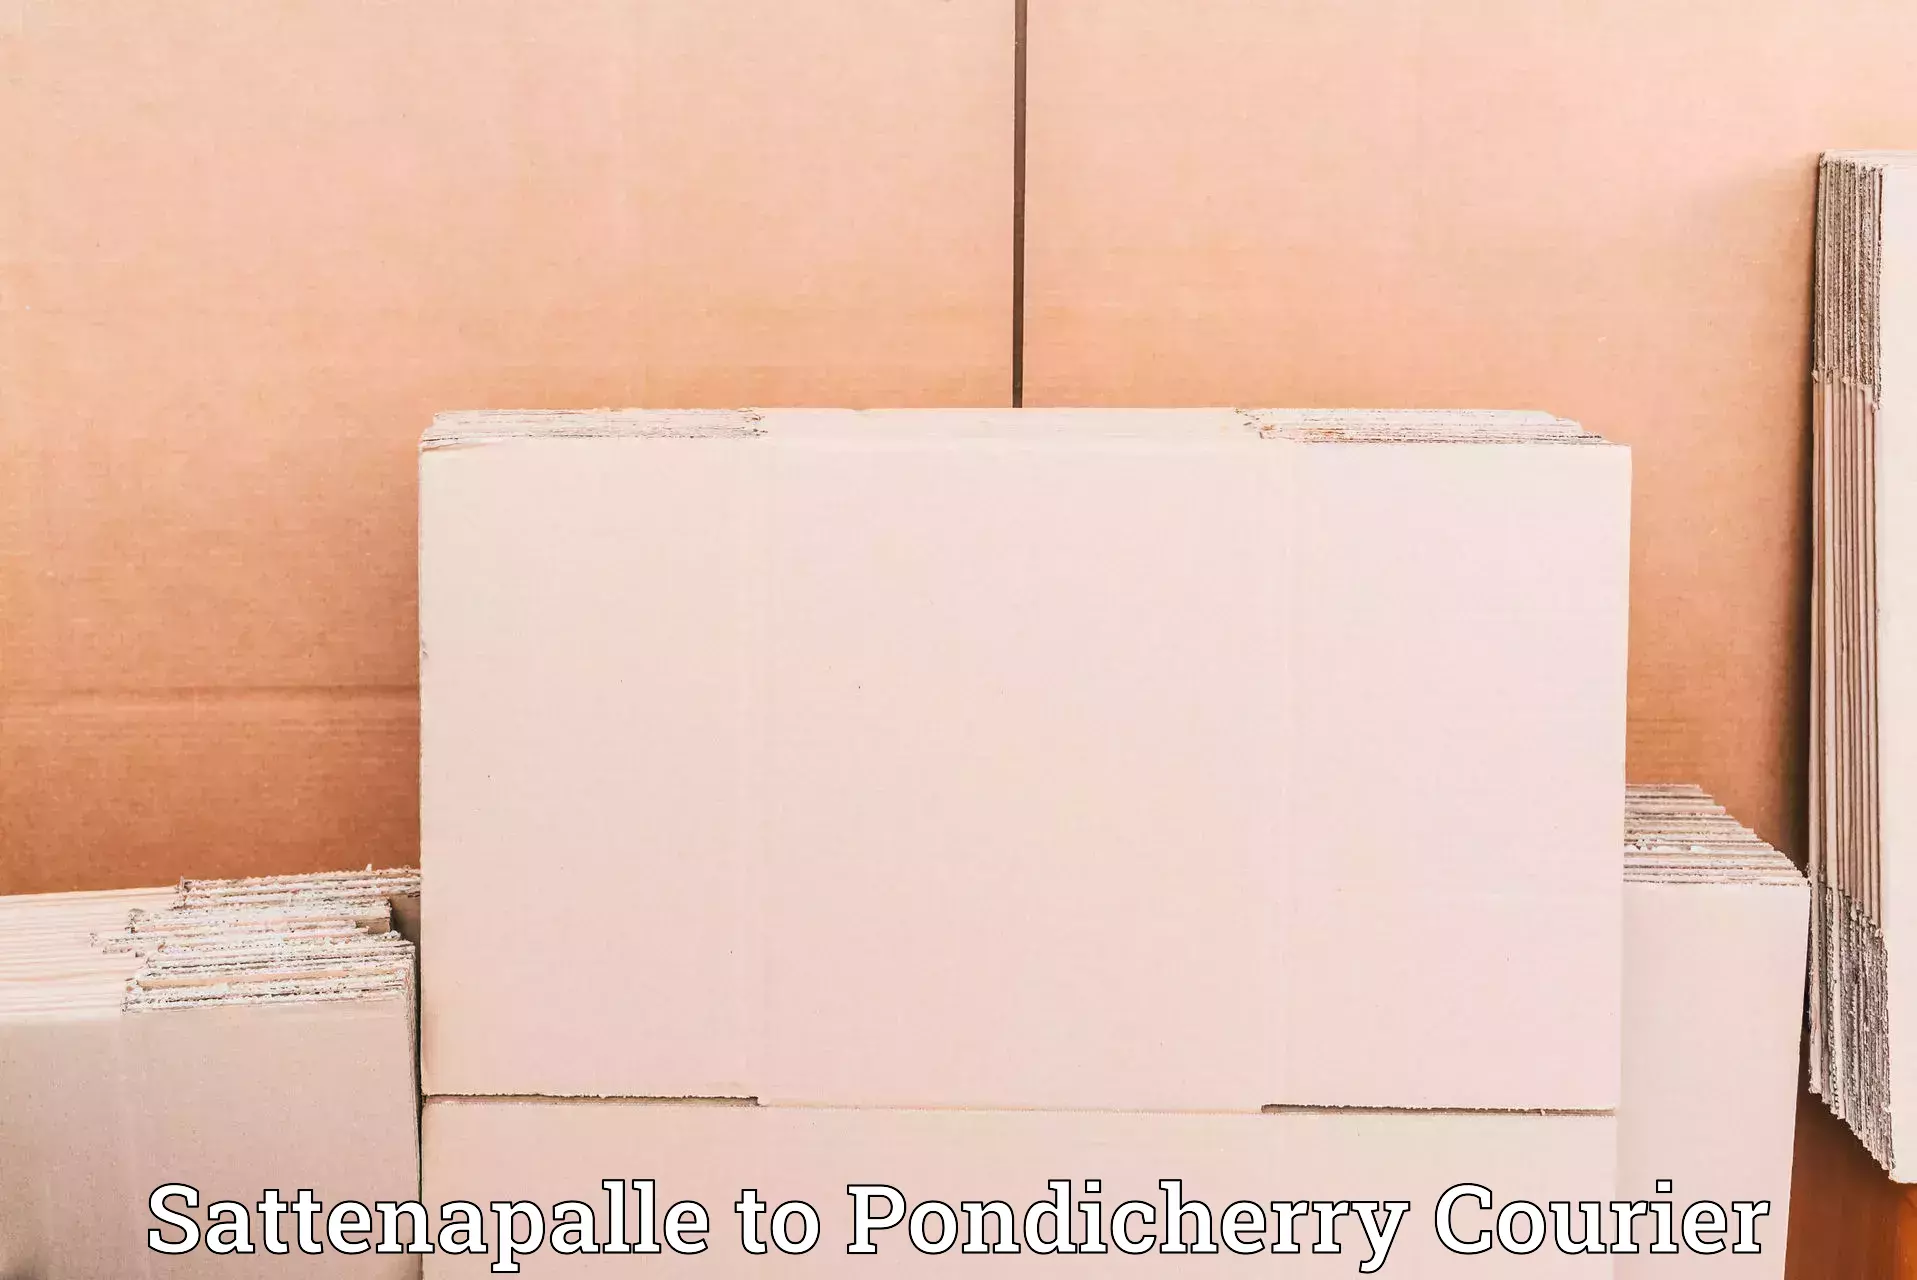 Courier service partnerships Sattenapalle to Pondicherry